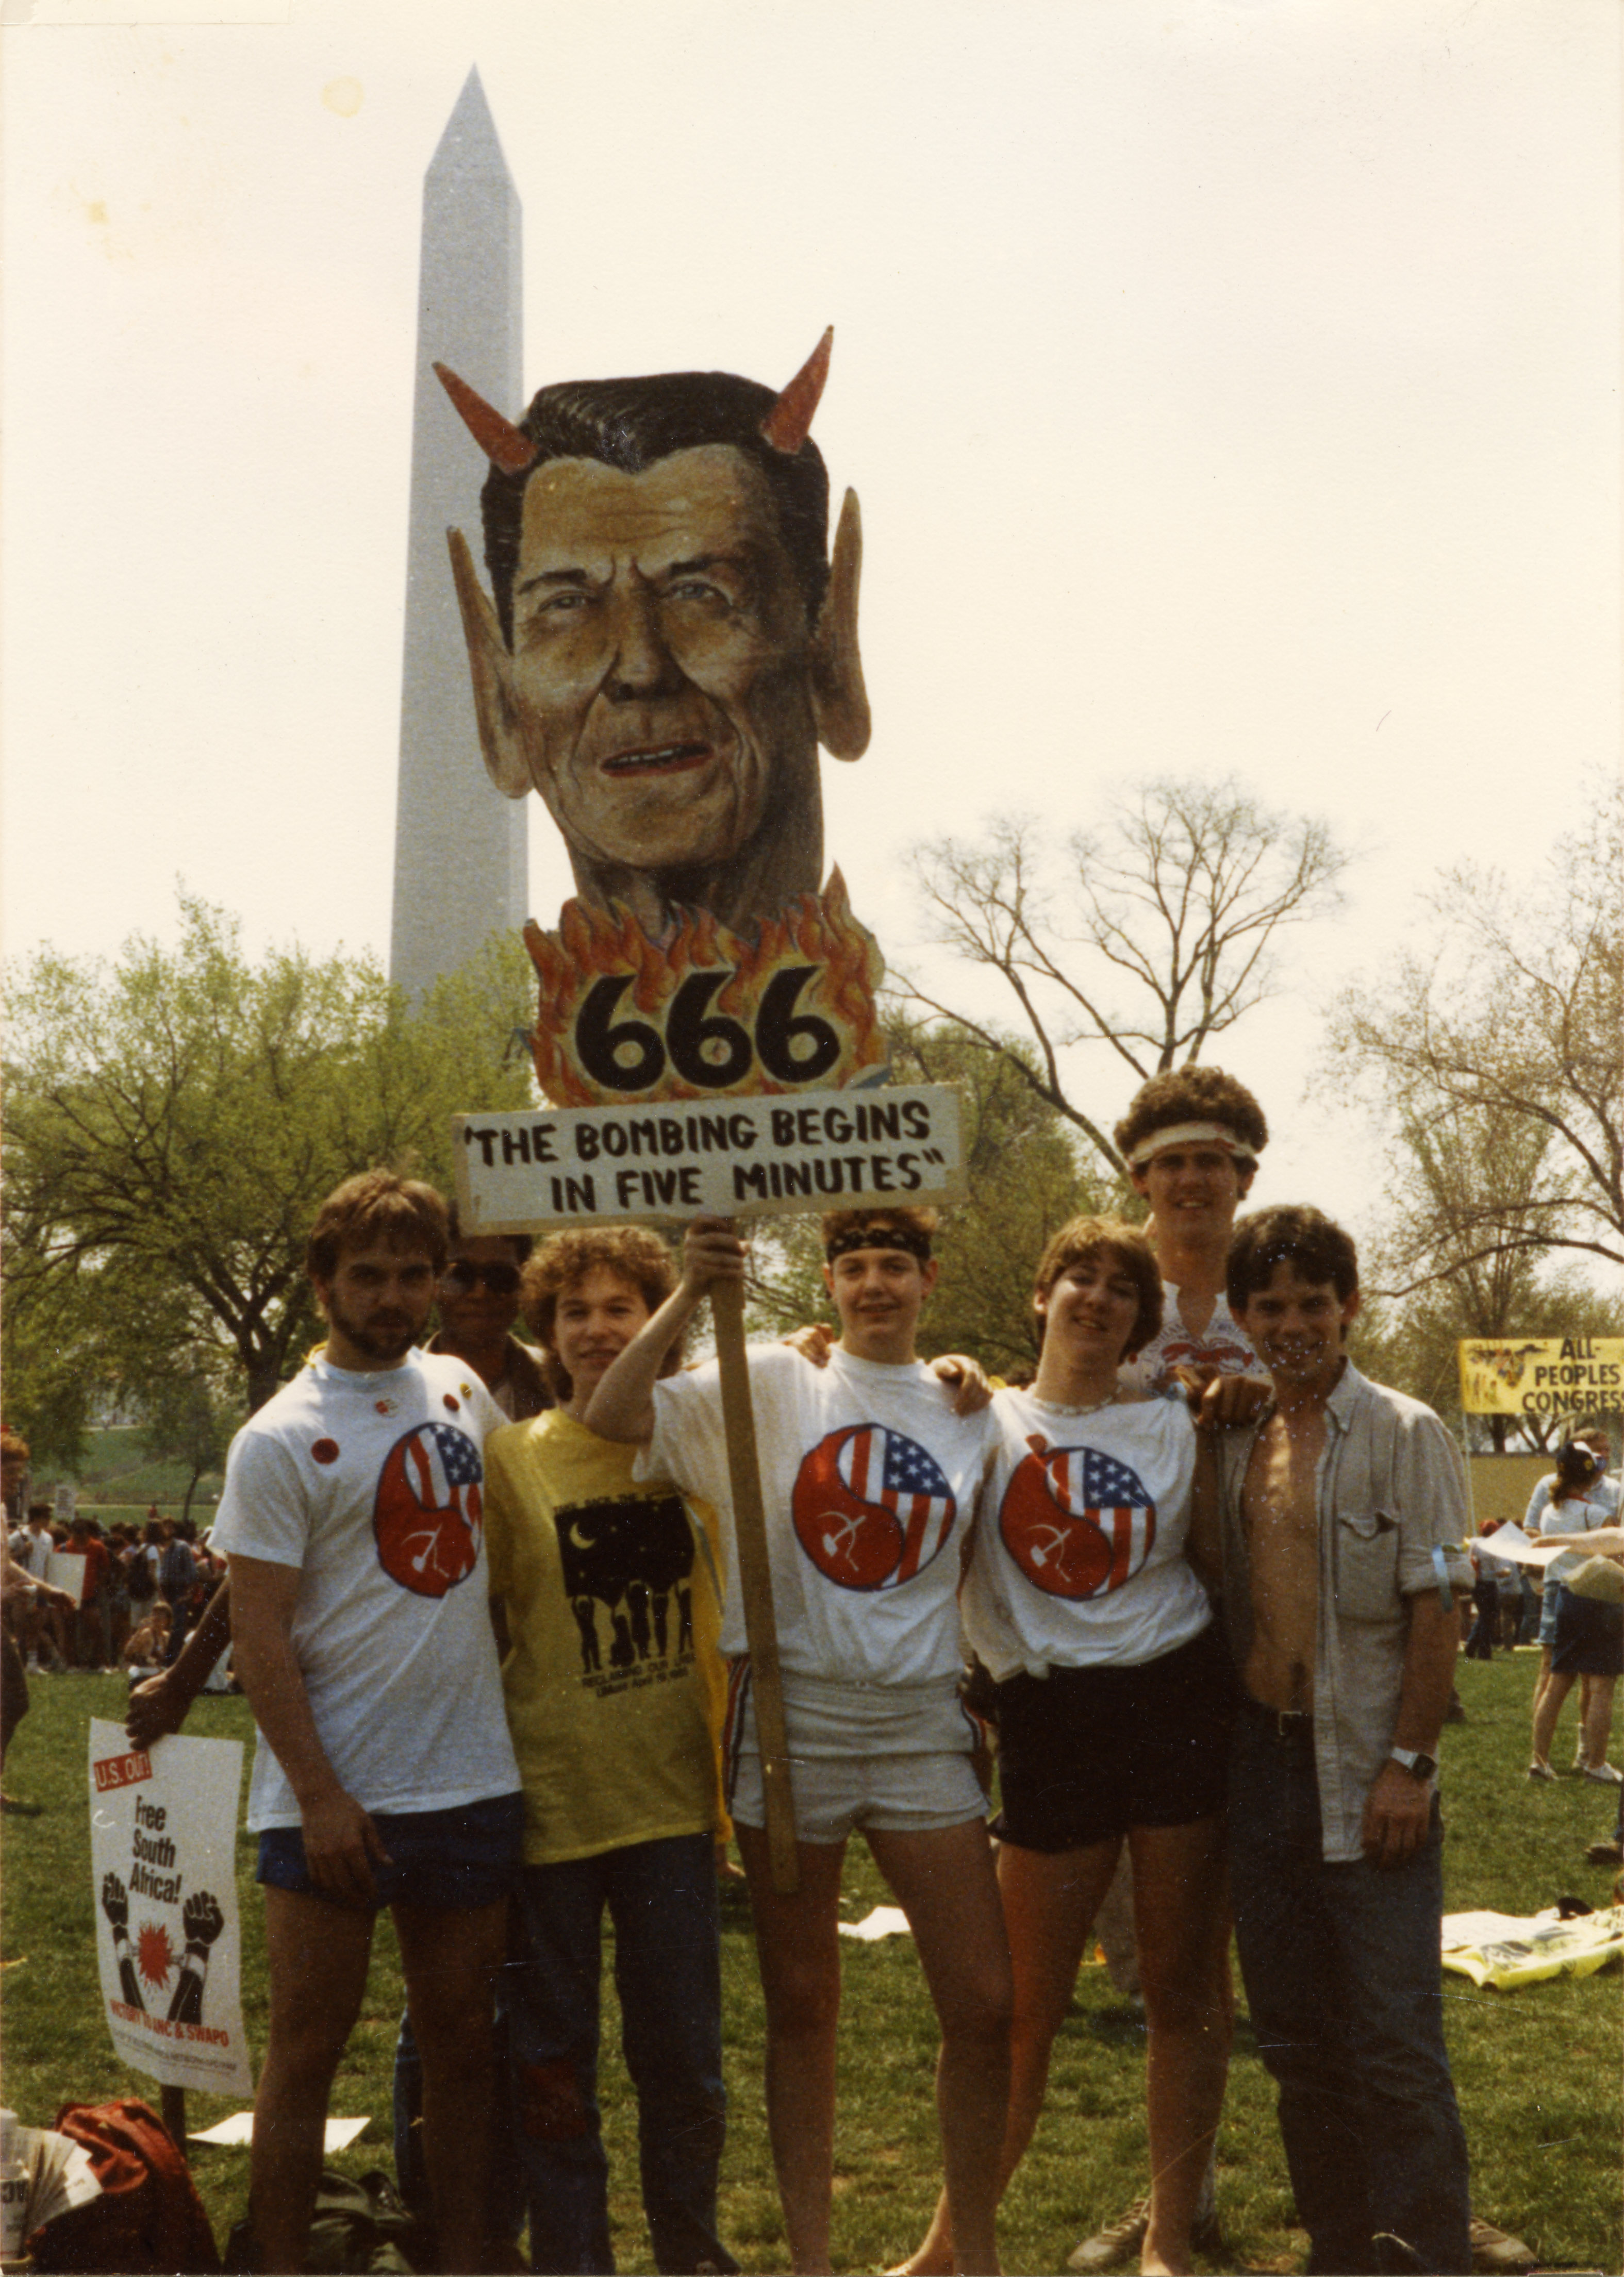 
An image of: Peacemakers at the Four Days in April protest, Washinton, D.C., April 1985